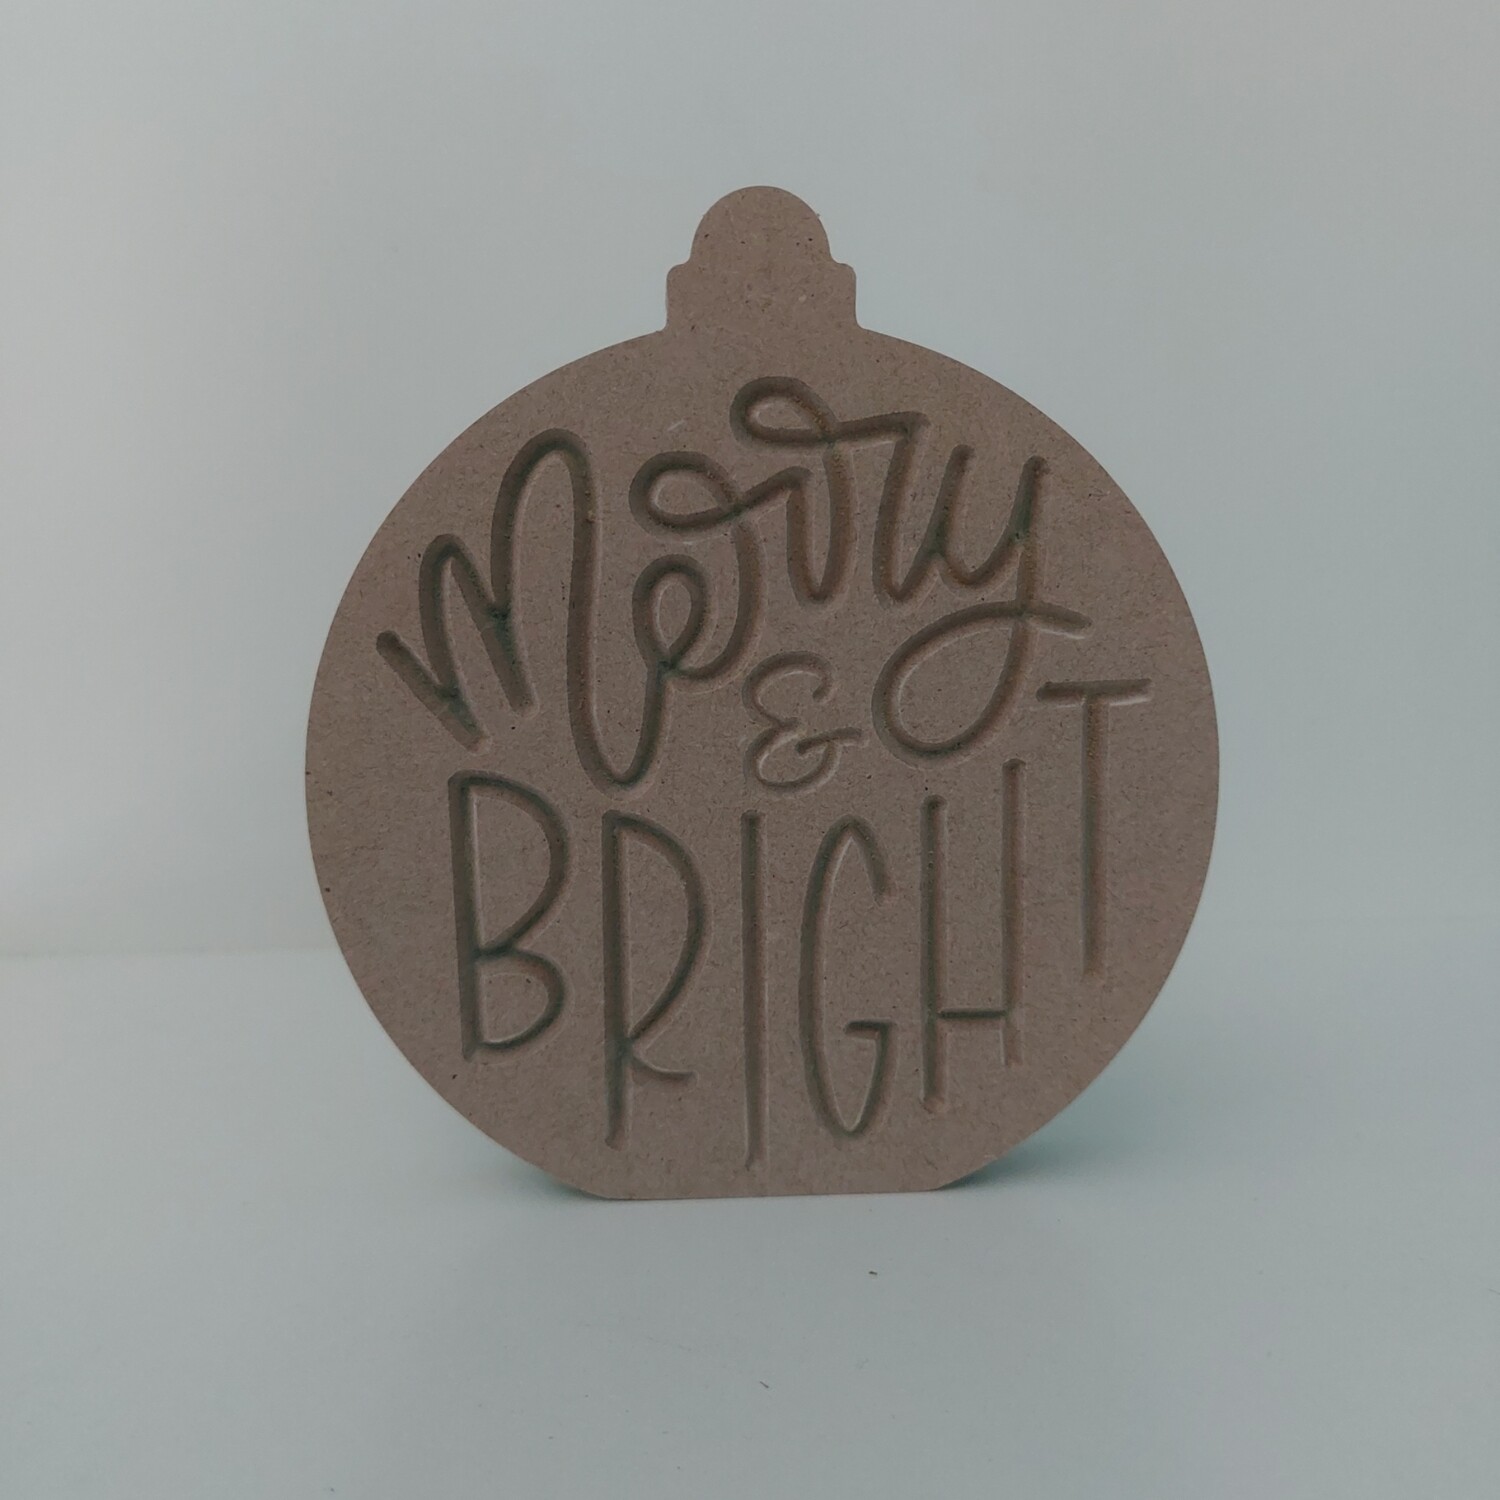 Merry & Bright Freestanding Bauble 18mm